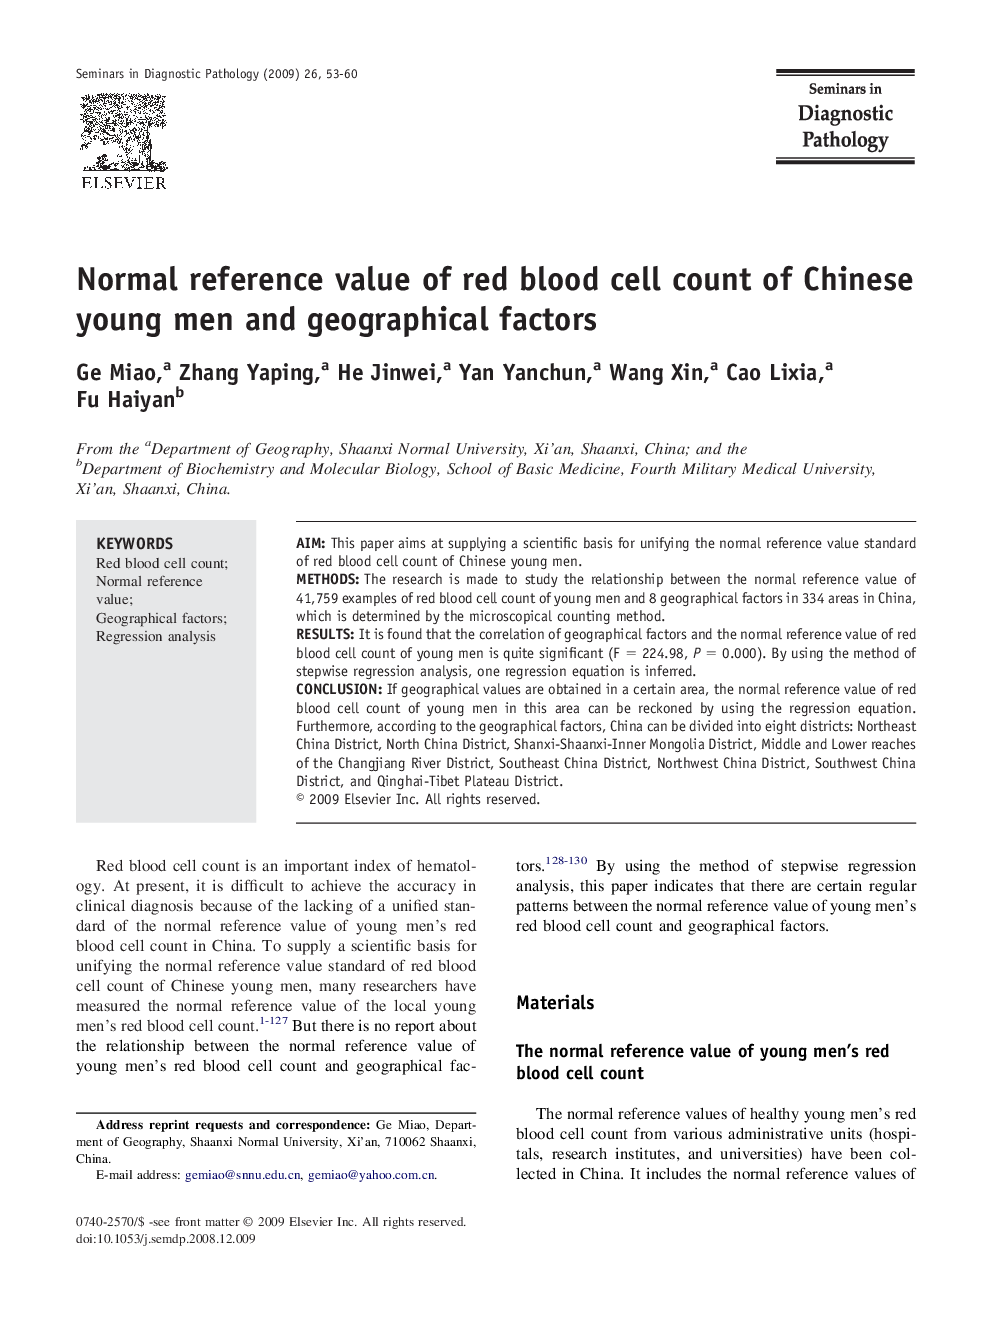 Normal reference value of red blood cell count of Chinese young men and geographical factors